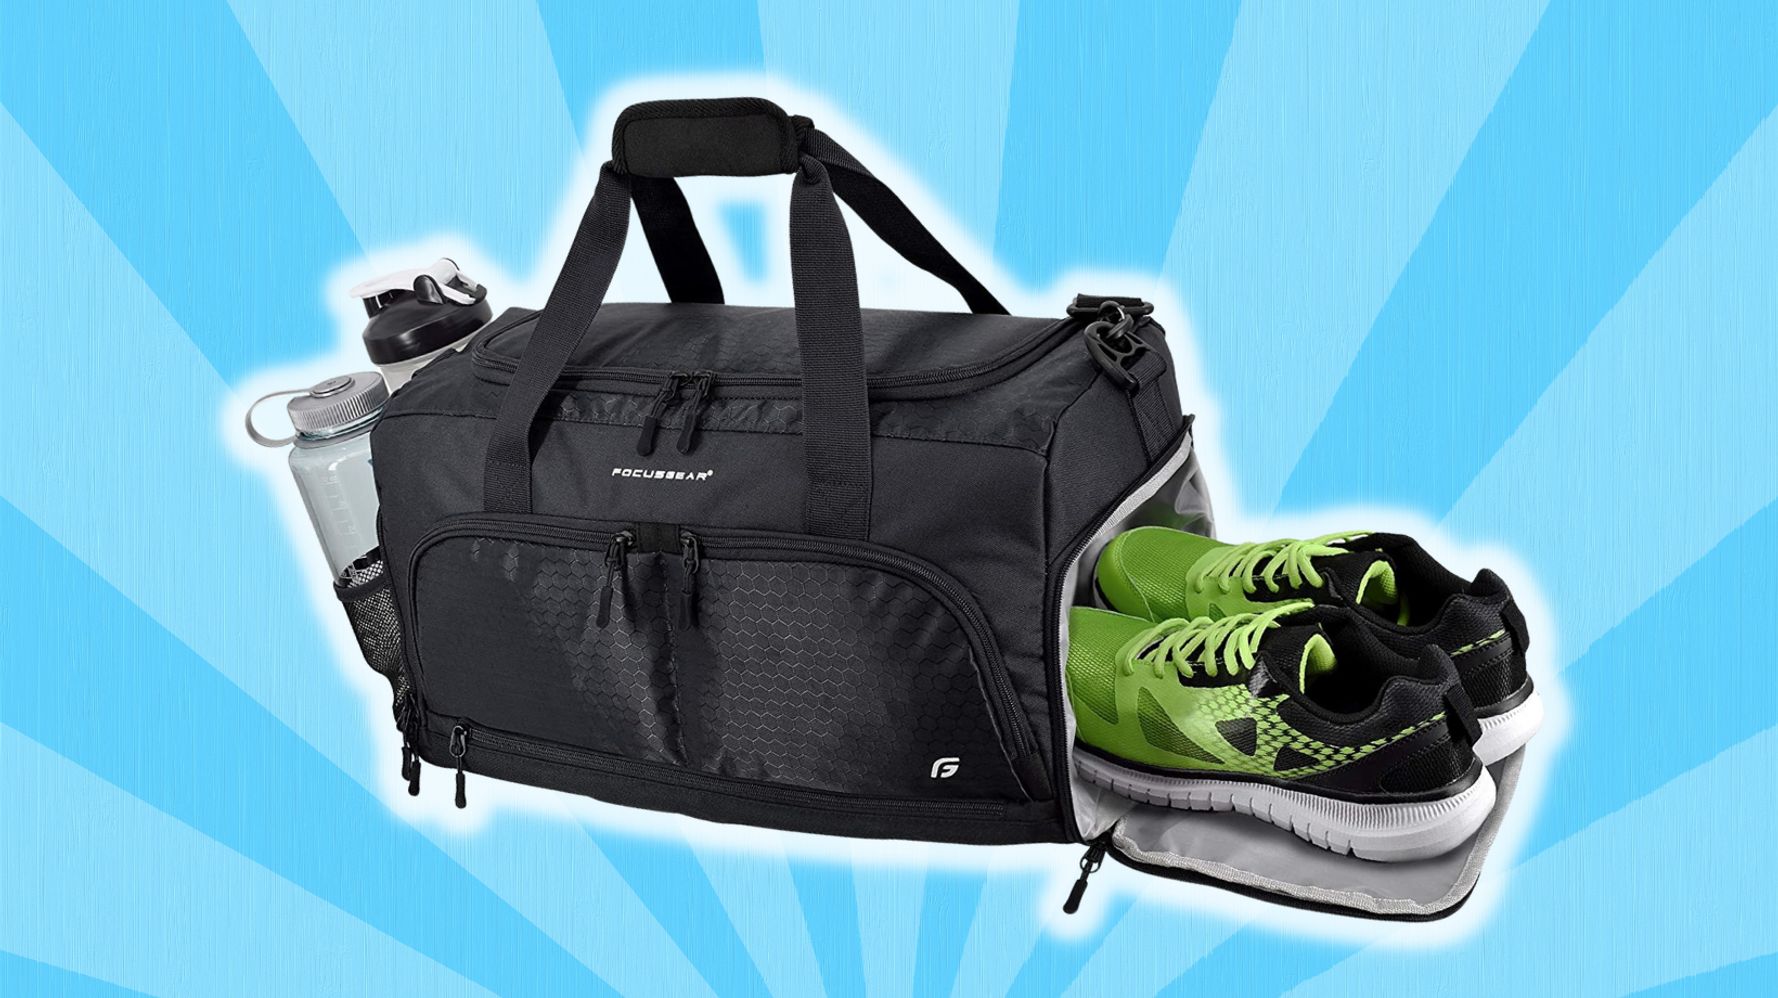 Gym bag with yoga mat holder  Elevate Your Active Lifestyle » Yoga Props